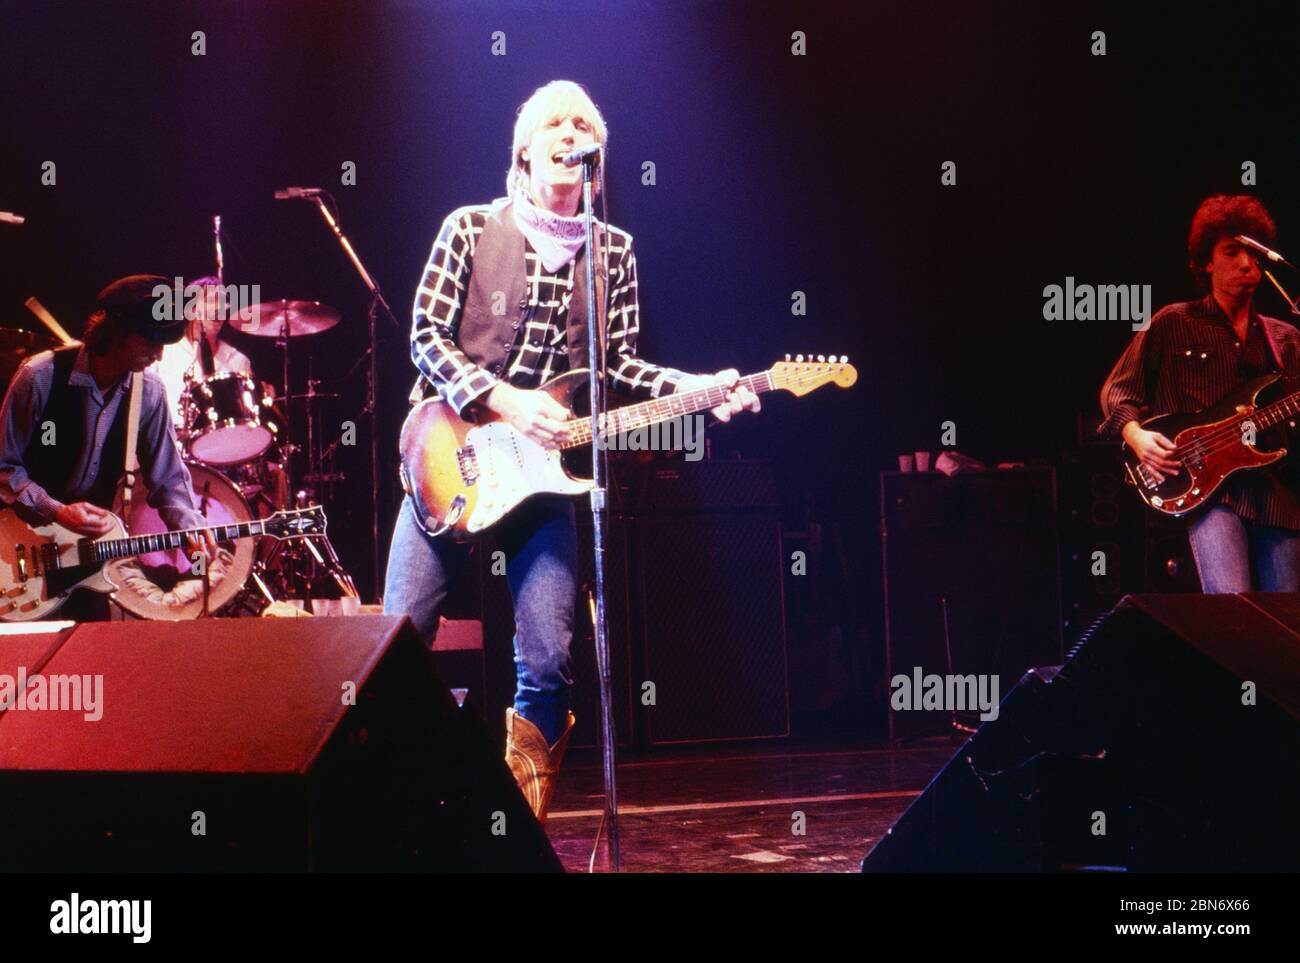 Tom Petty and the Heartbreakers, spielen live on stage bei 'Rockpop in Concert', Deutschland 1983. American band 'Tom Petty and the Heartbreakers' performing, Germany 1983. Stock Photo